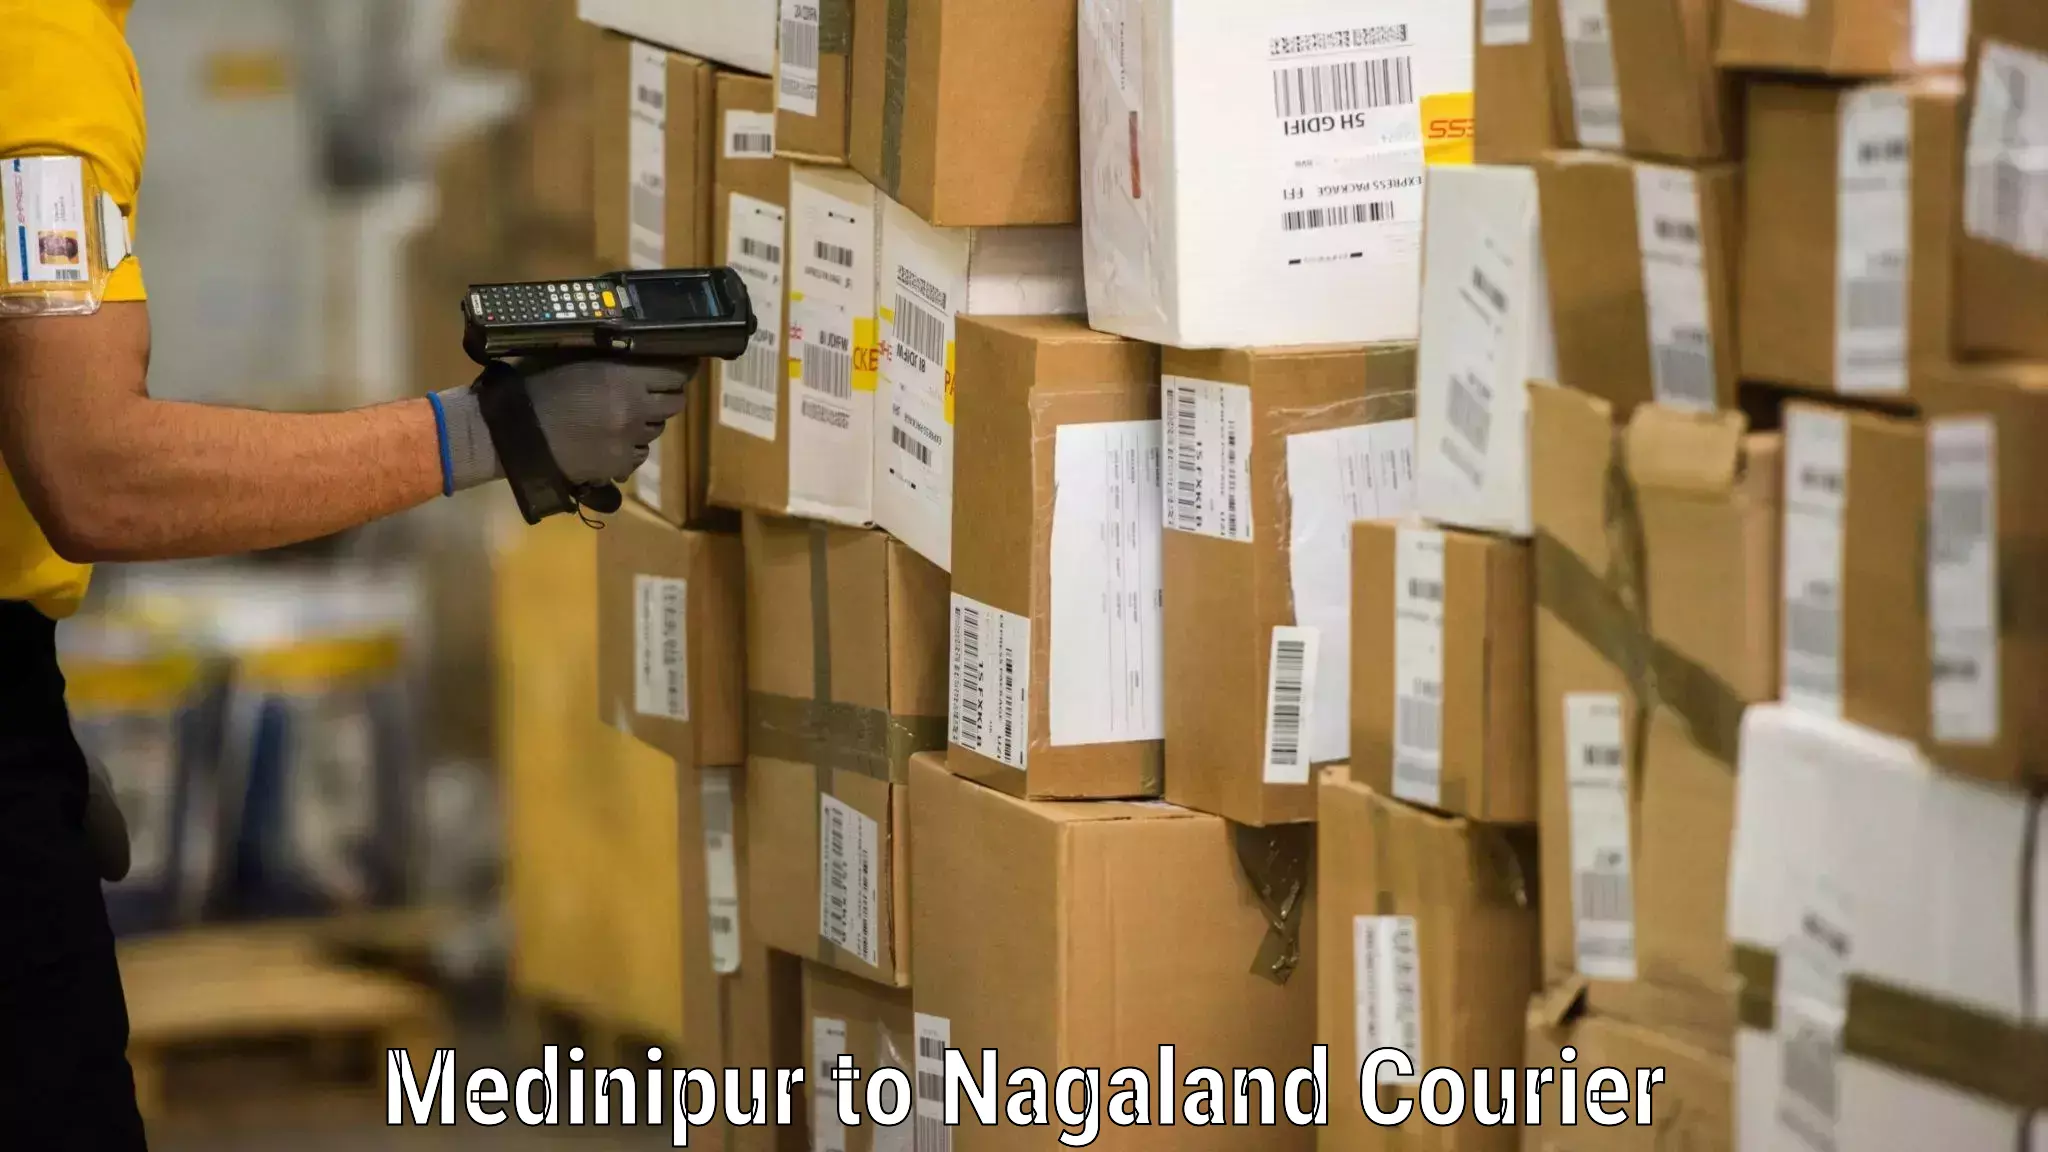 Moving and handling services in Medinipur to Nagaland